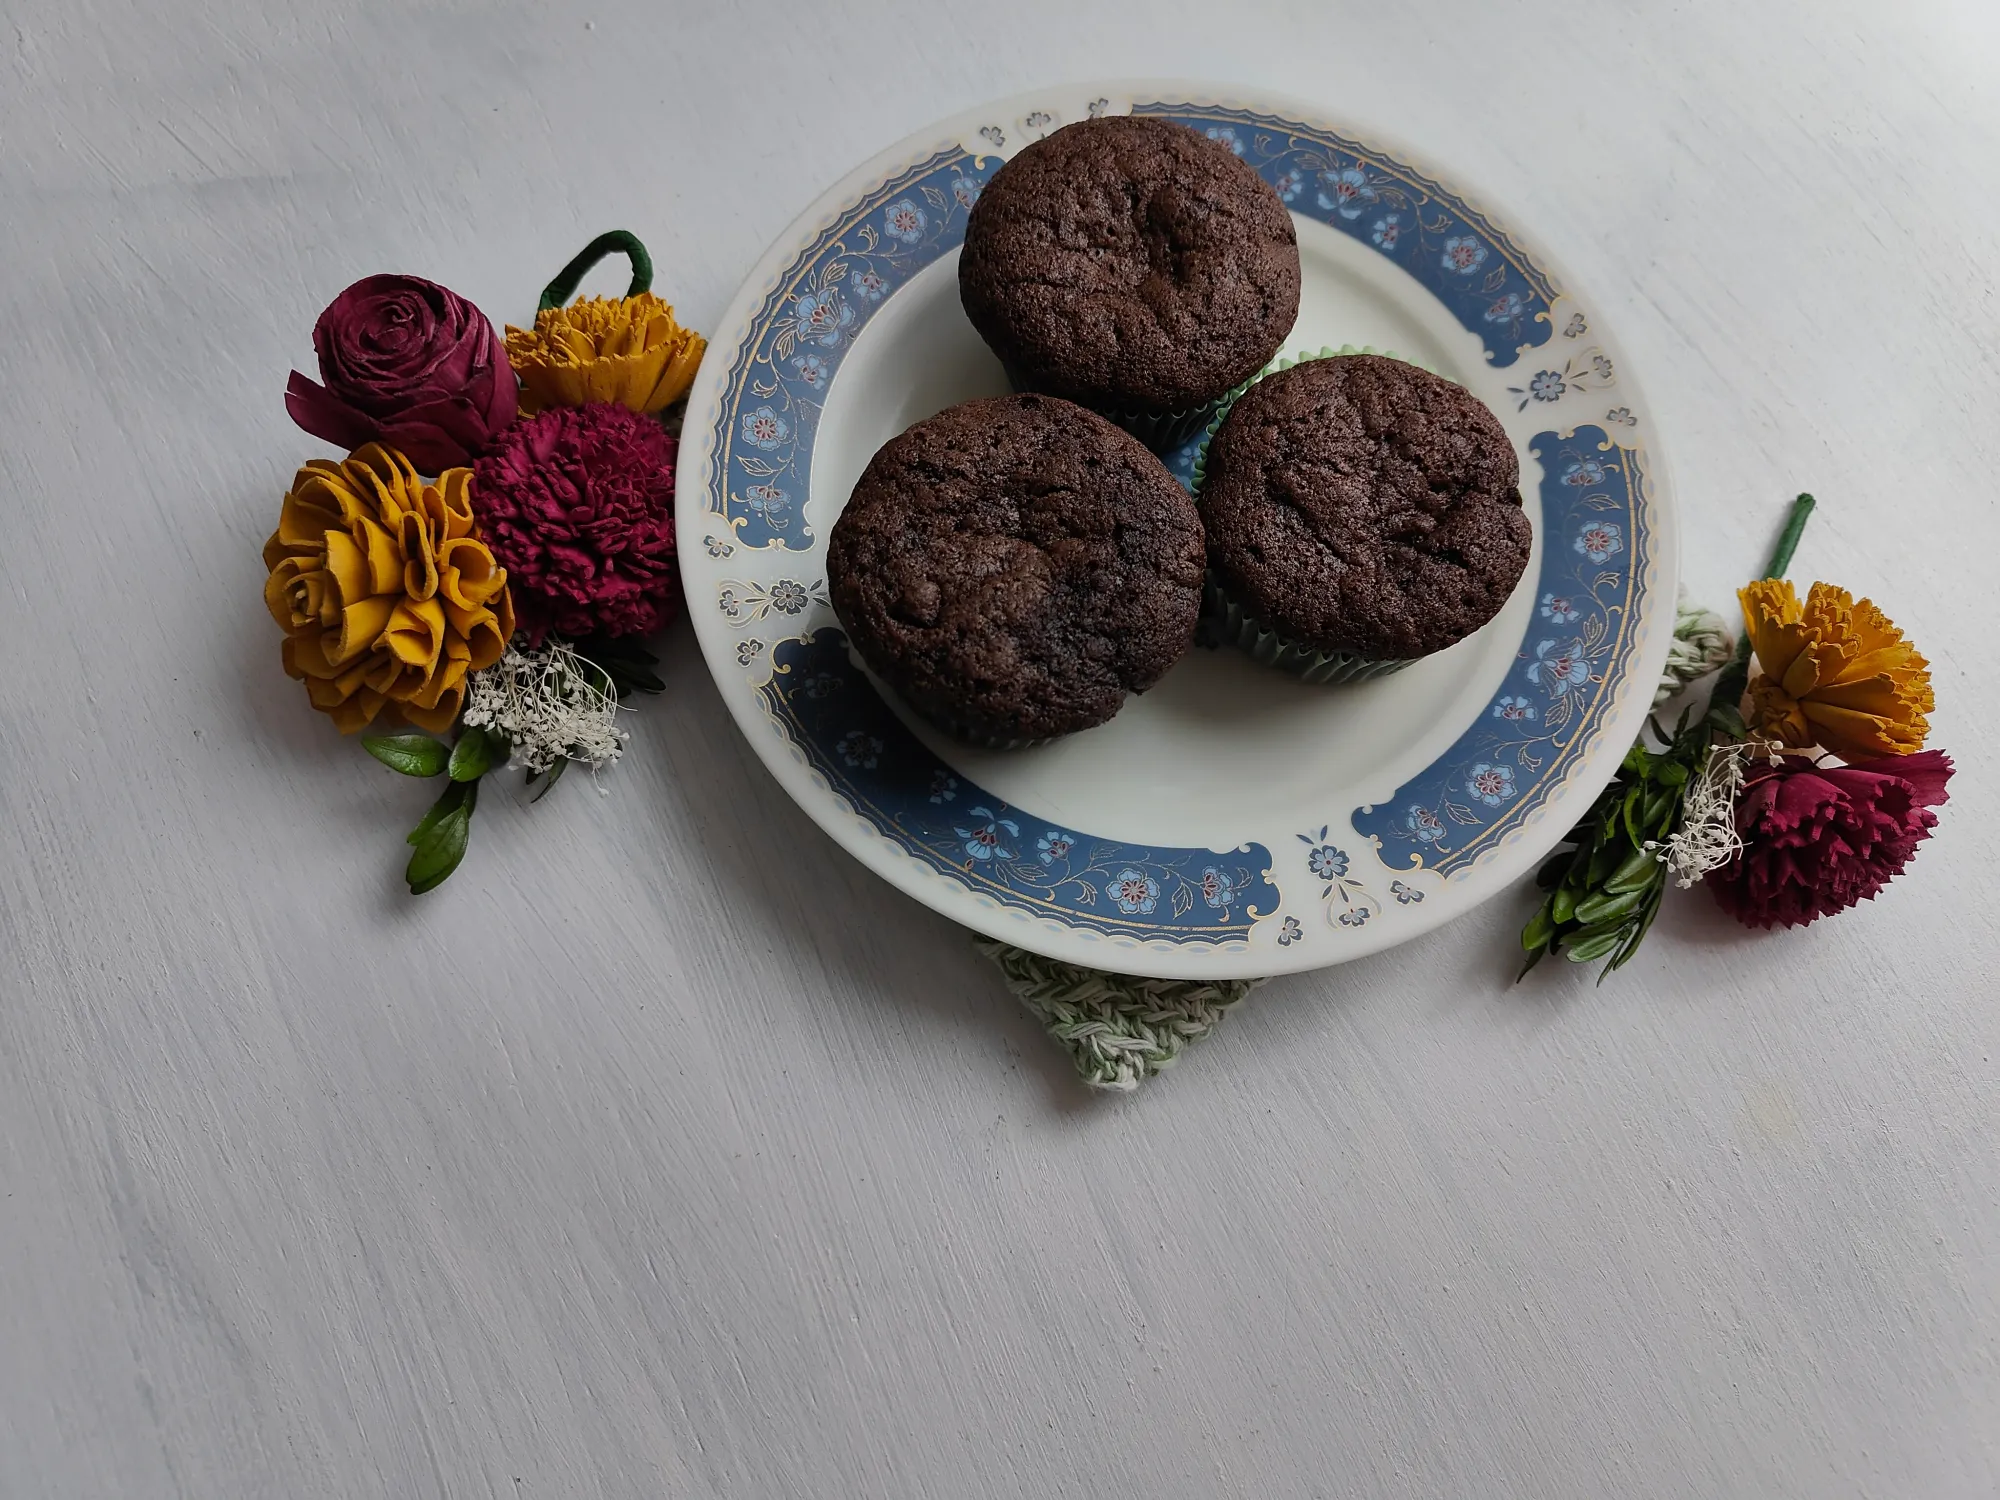 A plate full of chocolate muffins